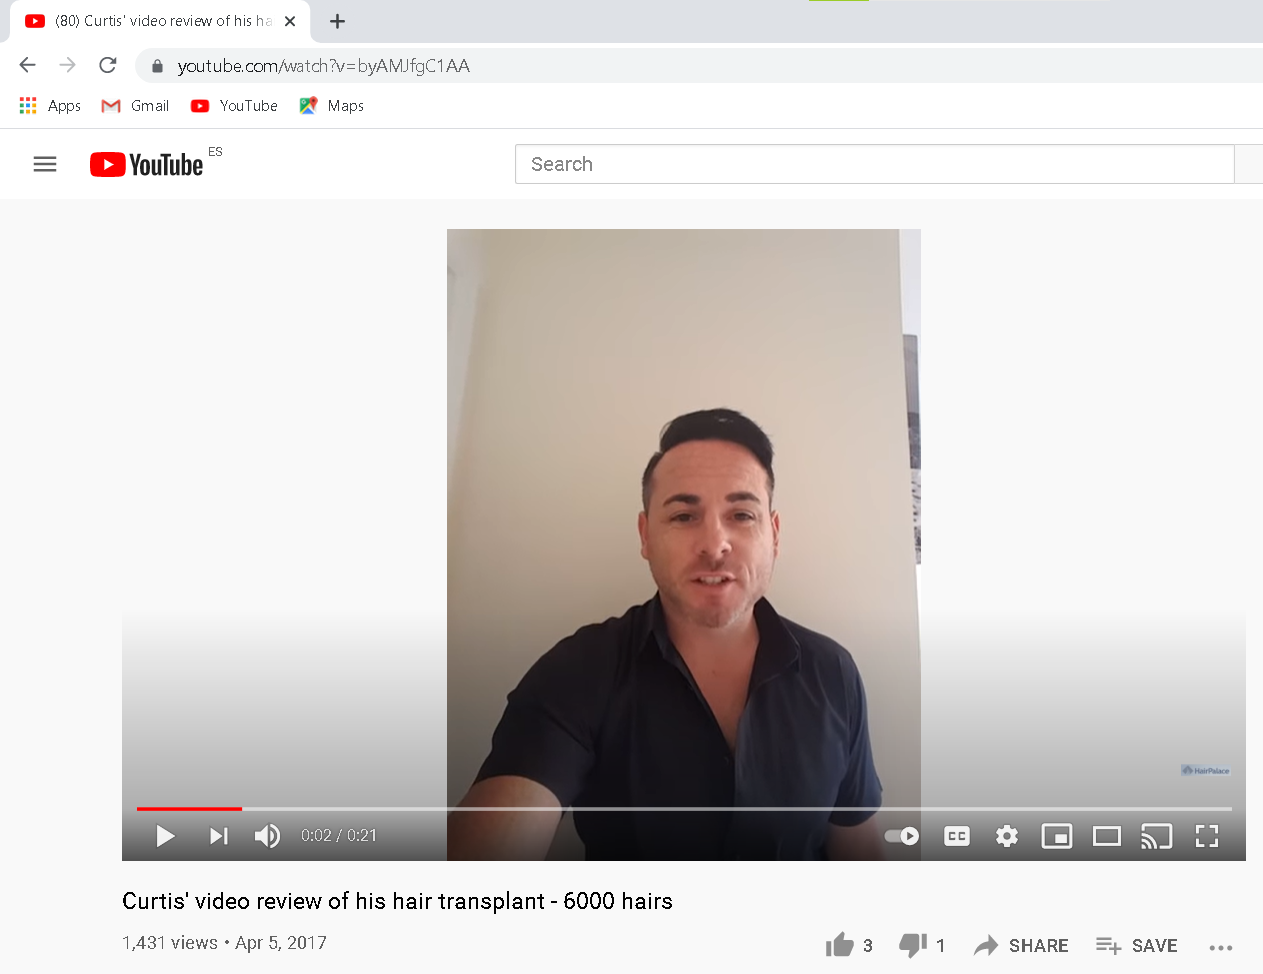 video review about a hair transplant experience